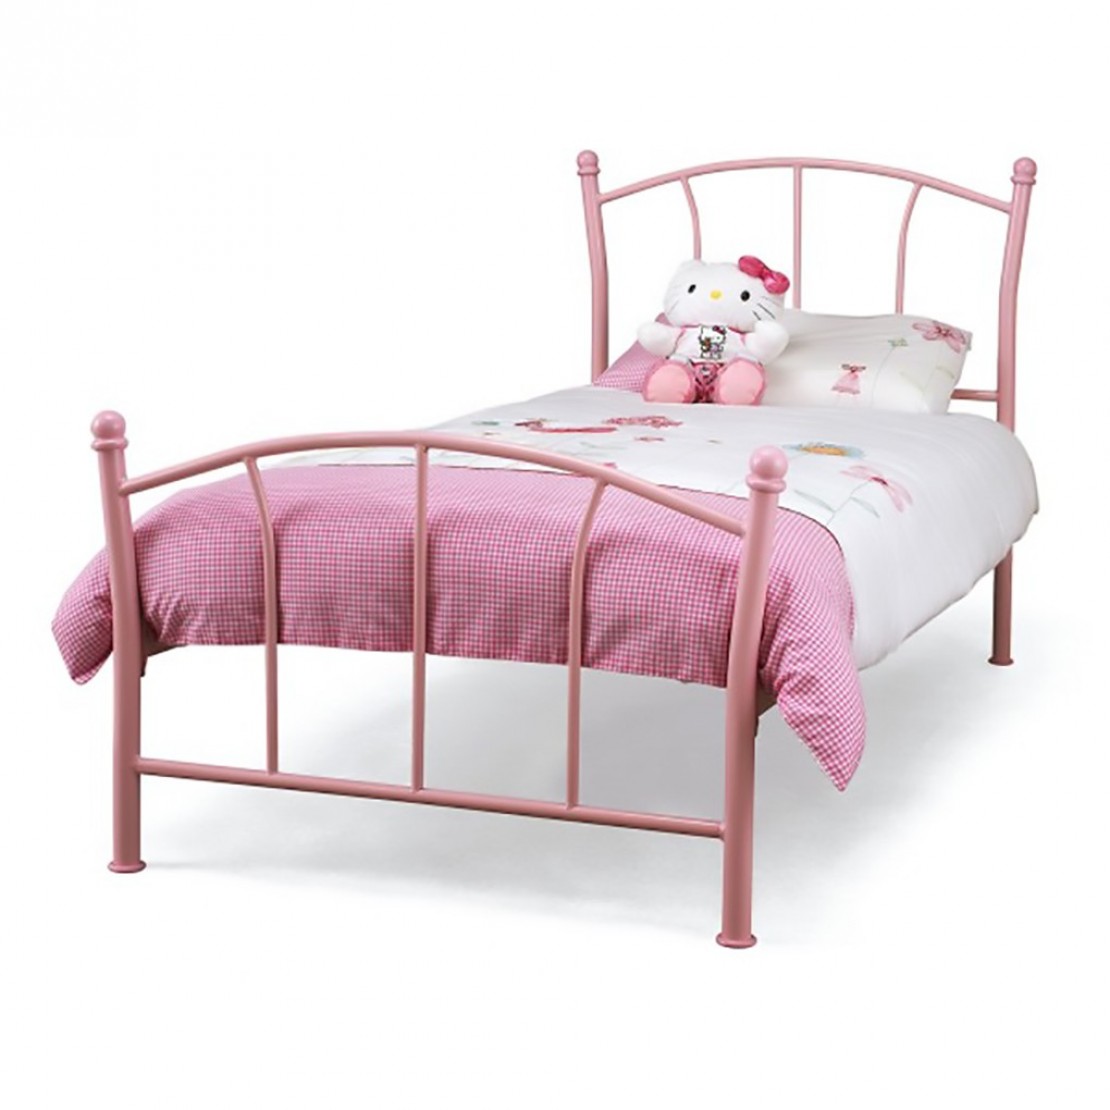 /_images/product-photos/serene-furnishings-penny-pink-gloss-a.jpg